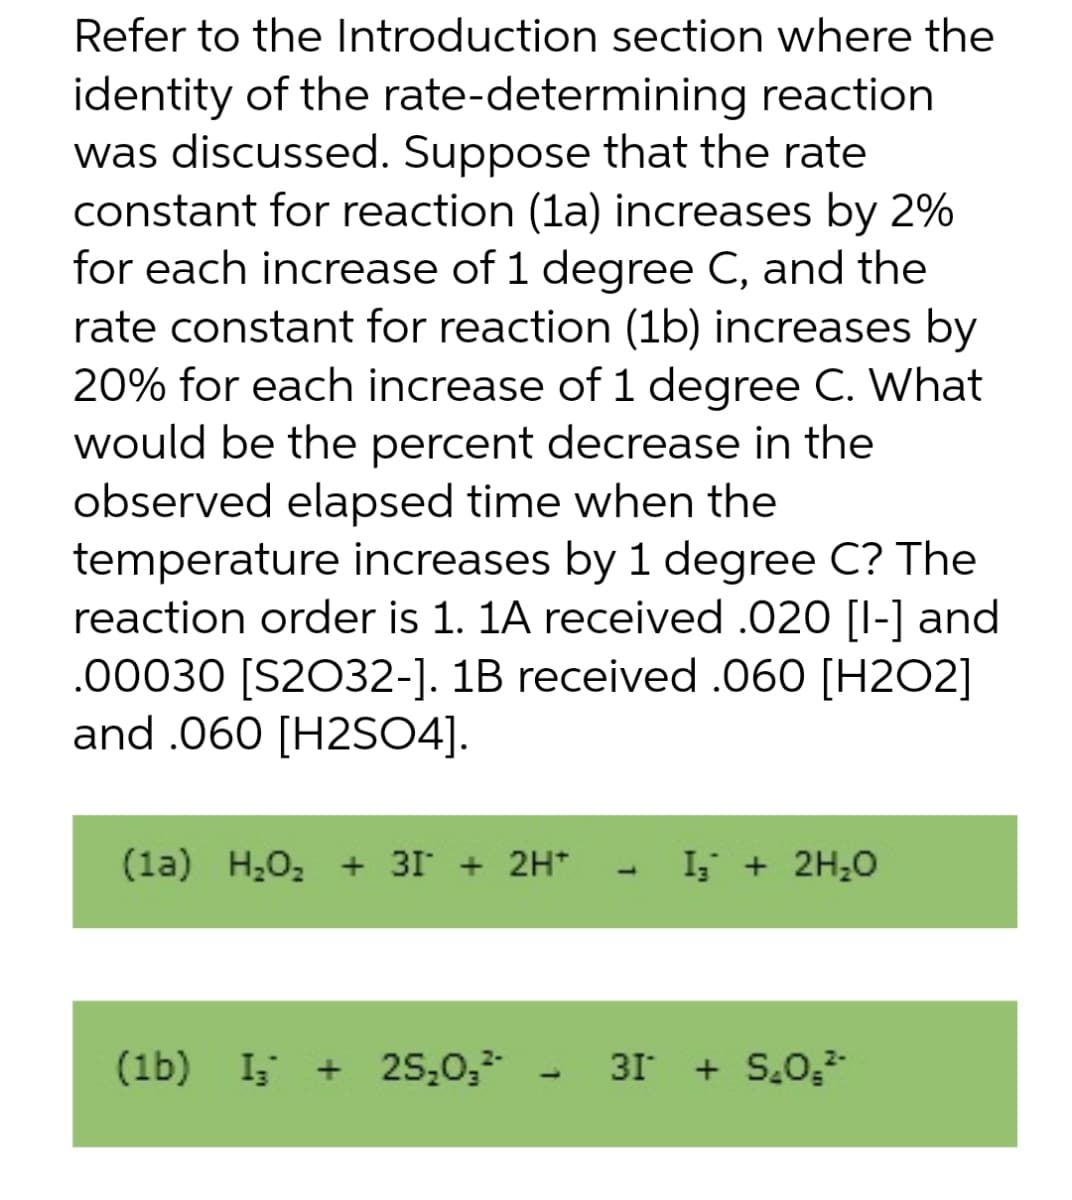 identity of the
Refer to the Introduction section where the
rate-determining reaction
was discussed. Suppose that the rate
constant for reaction (1a) increases by 2%
for each increase of 1 degree C, and the
rate constant for reaction (1b) increases by
20% for each increase of 1 degree C. What
would be the percent decrease in the
observed elapsed time when the
temperature increases by 1 degree C? The
reaction order is 1. 1A received .020 [1-] and
.00030 [S2032-]. 1B received .060 [H202]
and .060 [H2SO4].
(1a) H₂O₂ + 3 + 2H+
(1b) Is
I₂ + 25₂0₂²-
I₂ + 2H₂O
31* + S₂0,²¹